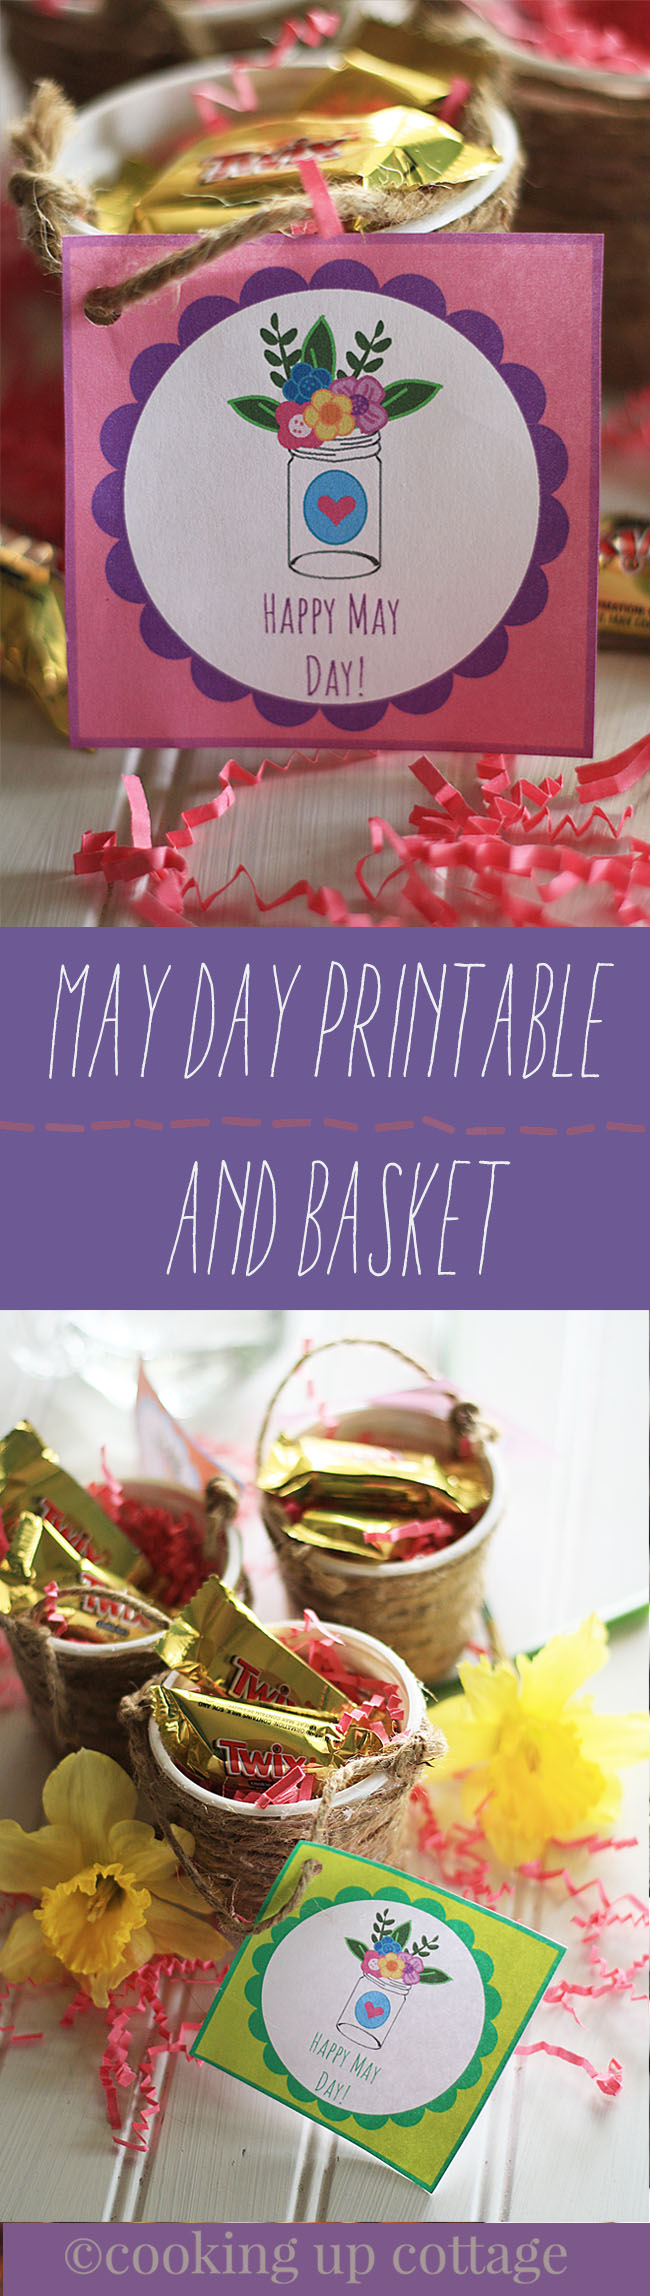 may-day-printable-and-basket-cooking-up-cottage